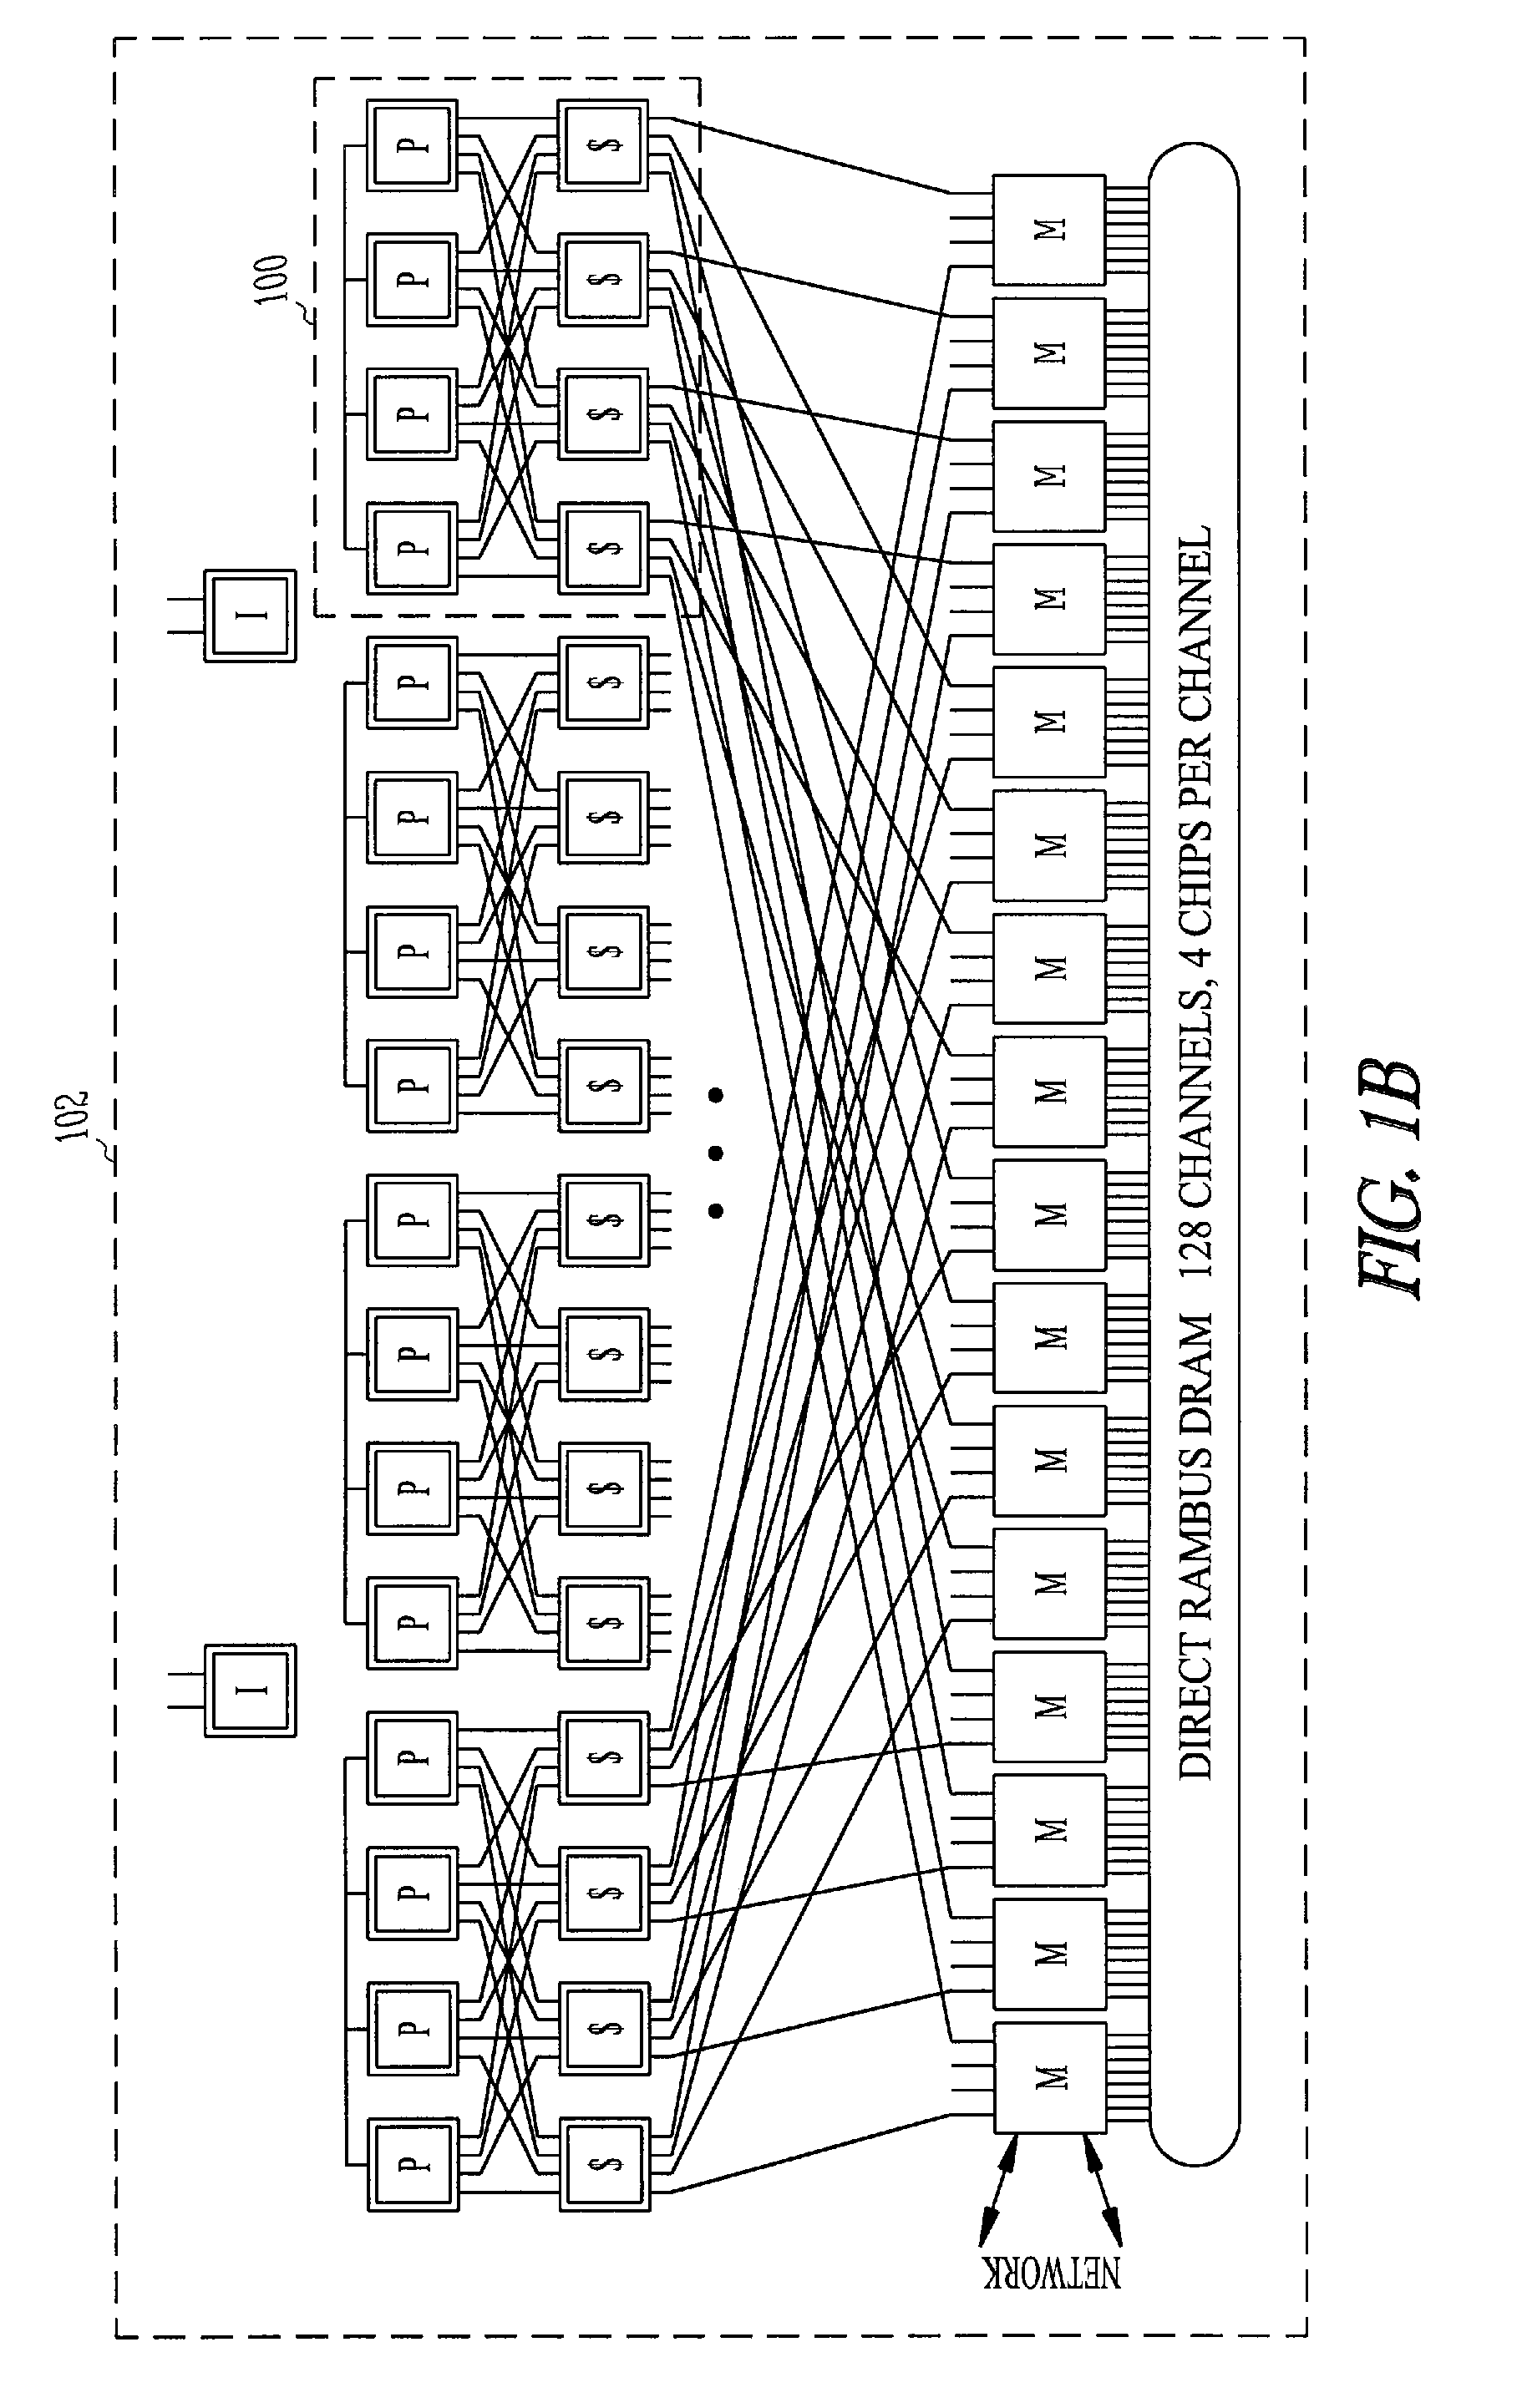 System and method for processing memory instructions using a forced order queue